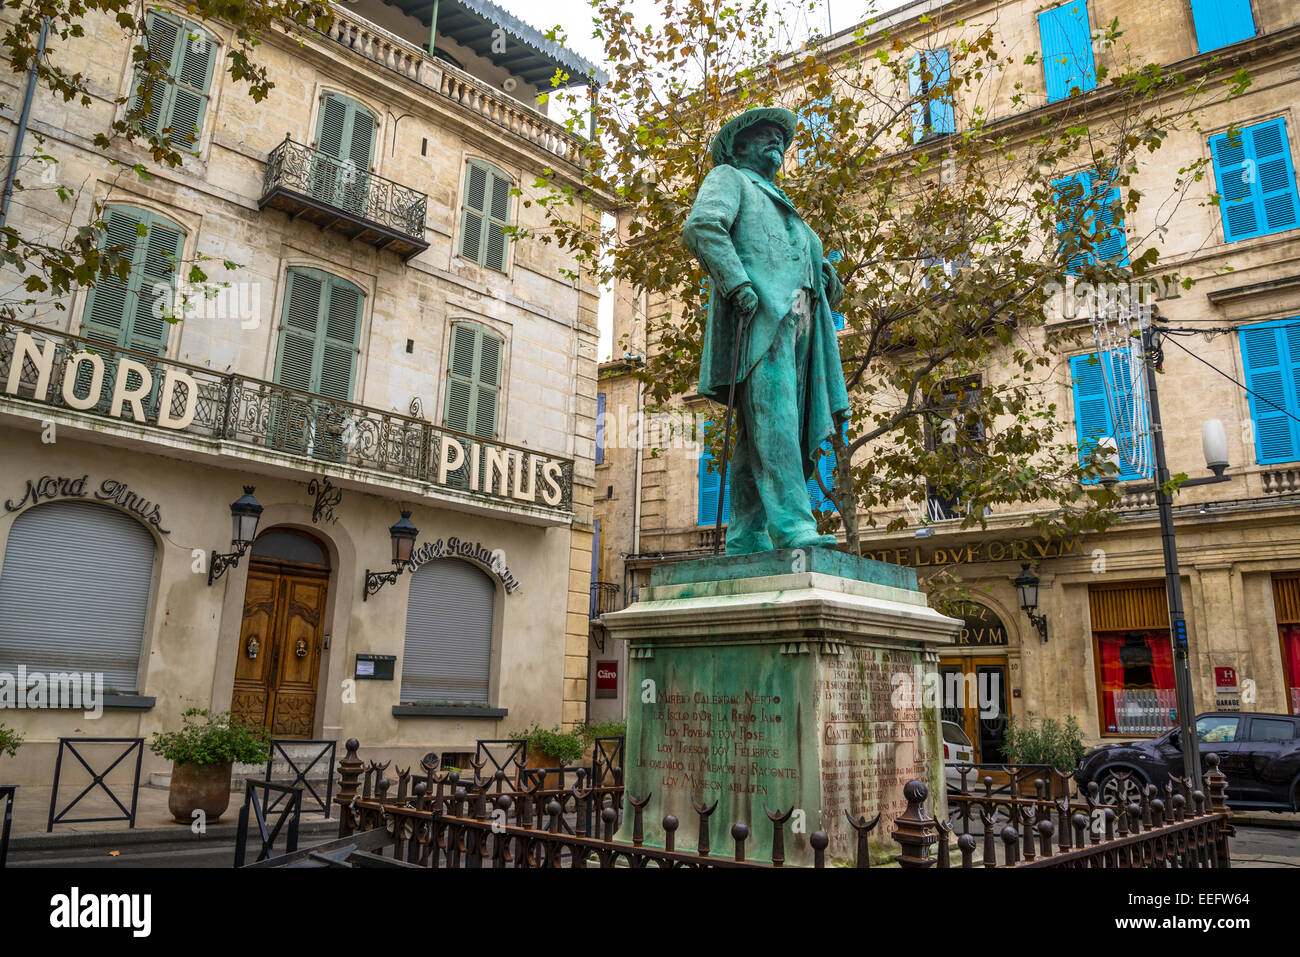 Statue of Frederic Mistral on Forum Square, Arles, Bouches-du-Rhone, France  Stock Photo - Alamy